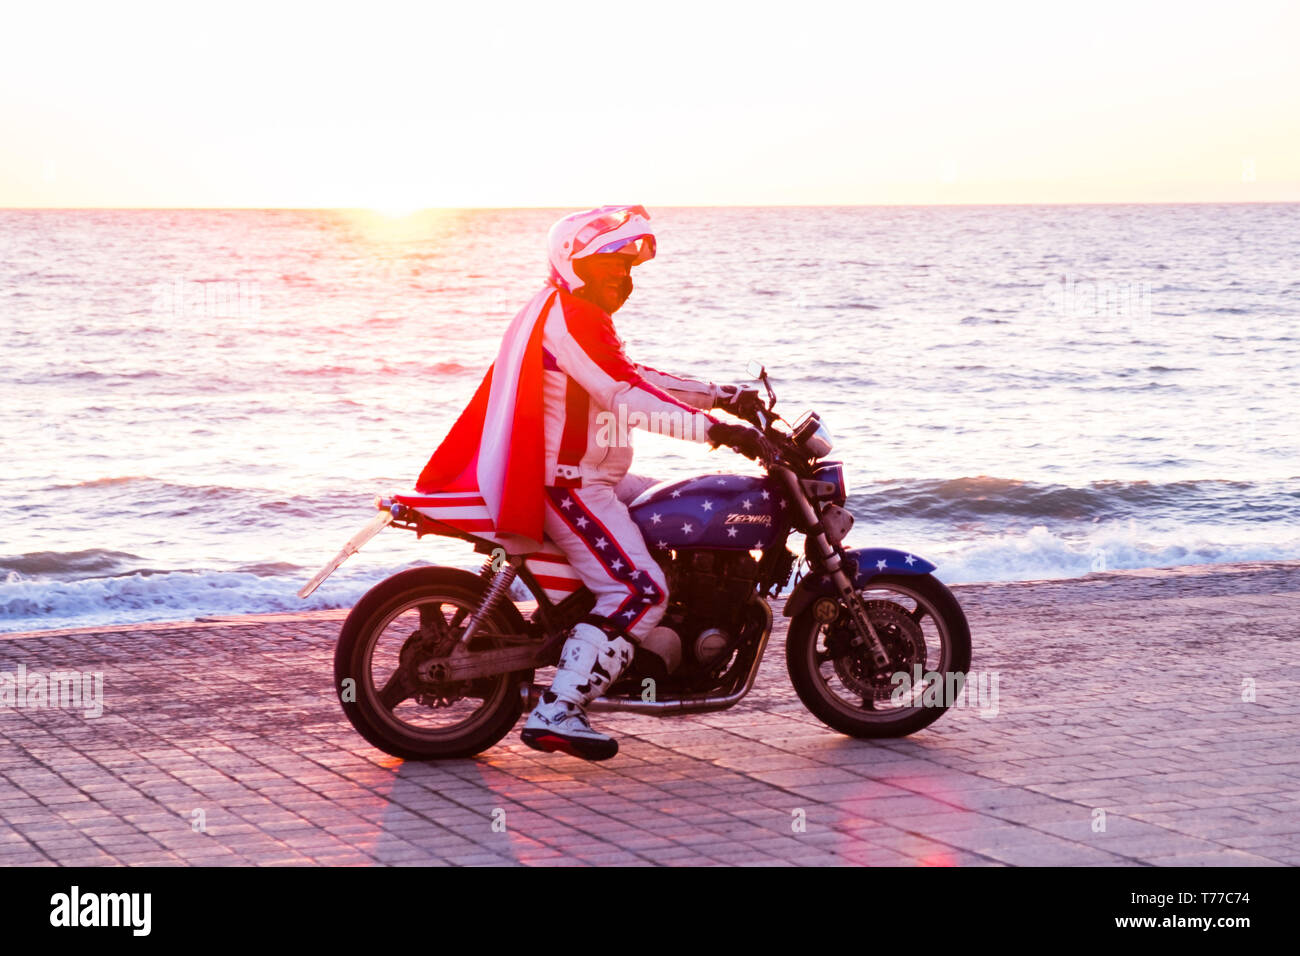 Aberystwyth, Wales. 04th May, 2019.   Some of the 50 motor bikers, all dressed as iconic stunt rider  'Evel Kneivel' arrive in Aberystwyth a dusk  as part of their annual charity fund raising ride around wales.  Now in its 8th year, the bikers start and finish in Wrexham and take 5 days to ride the 1070 mile perimiter of Wales, raising money for Macmillan Cancer Support, ending on Bank Holiday Monday   Credit: keith morris/Alamy Live News Stock Photo